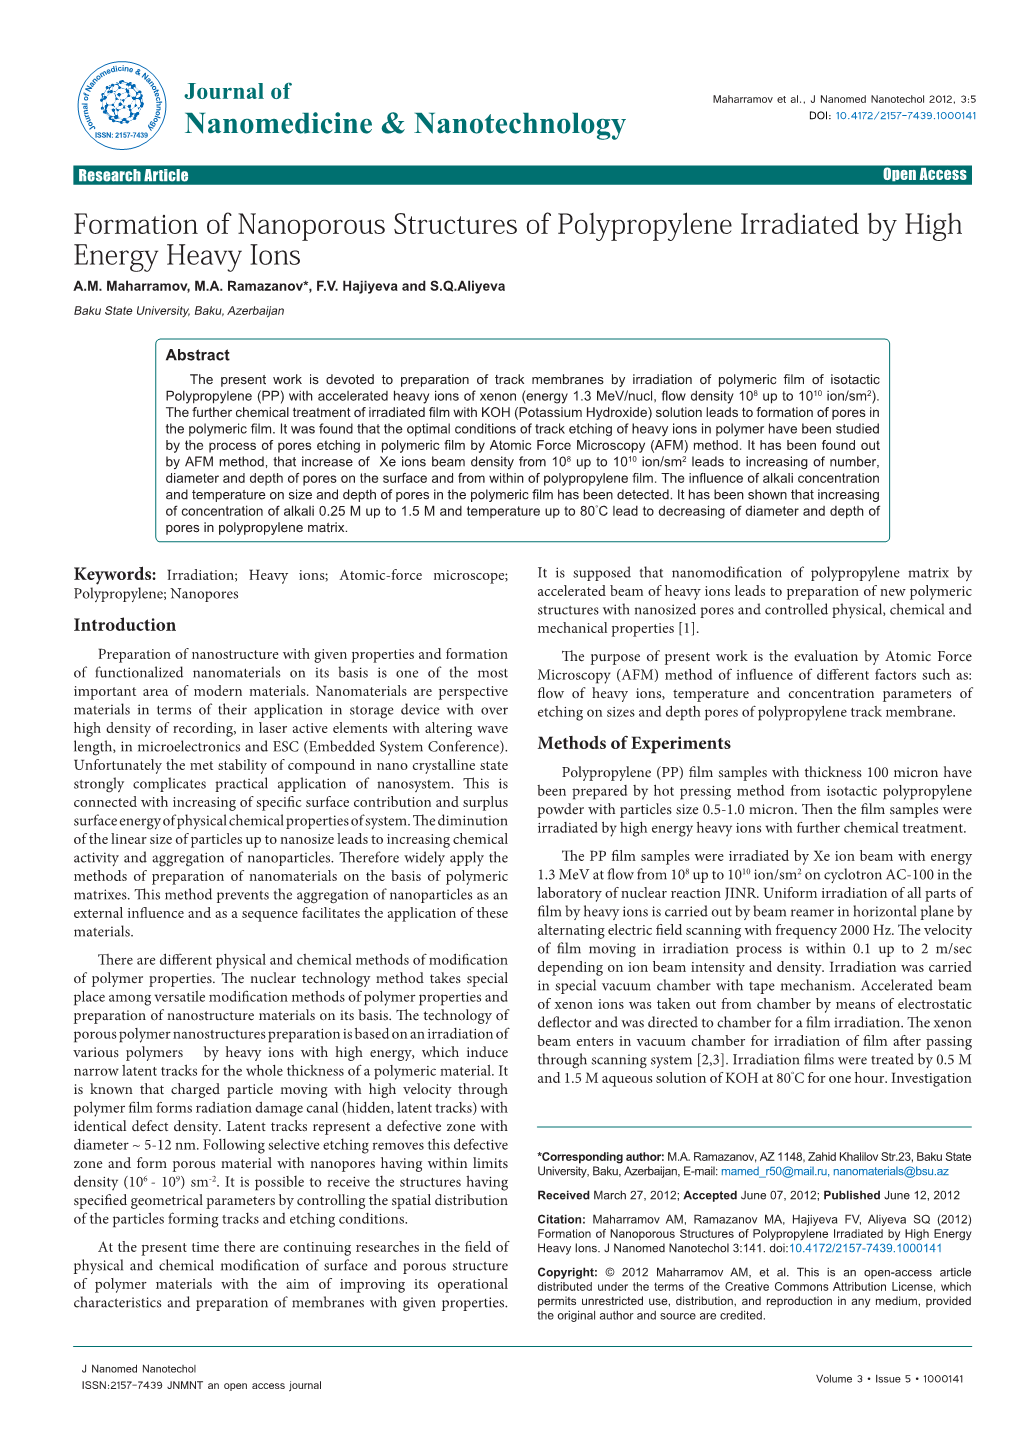 Formation of Nanoporous Structures of Polypropylene Irradiated by High Energy Heavy Ions A.M